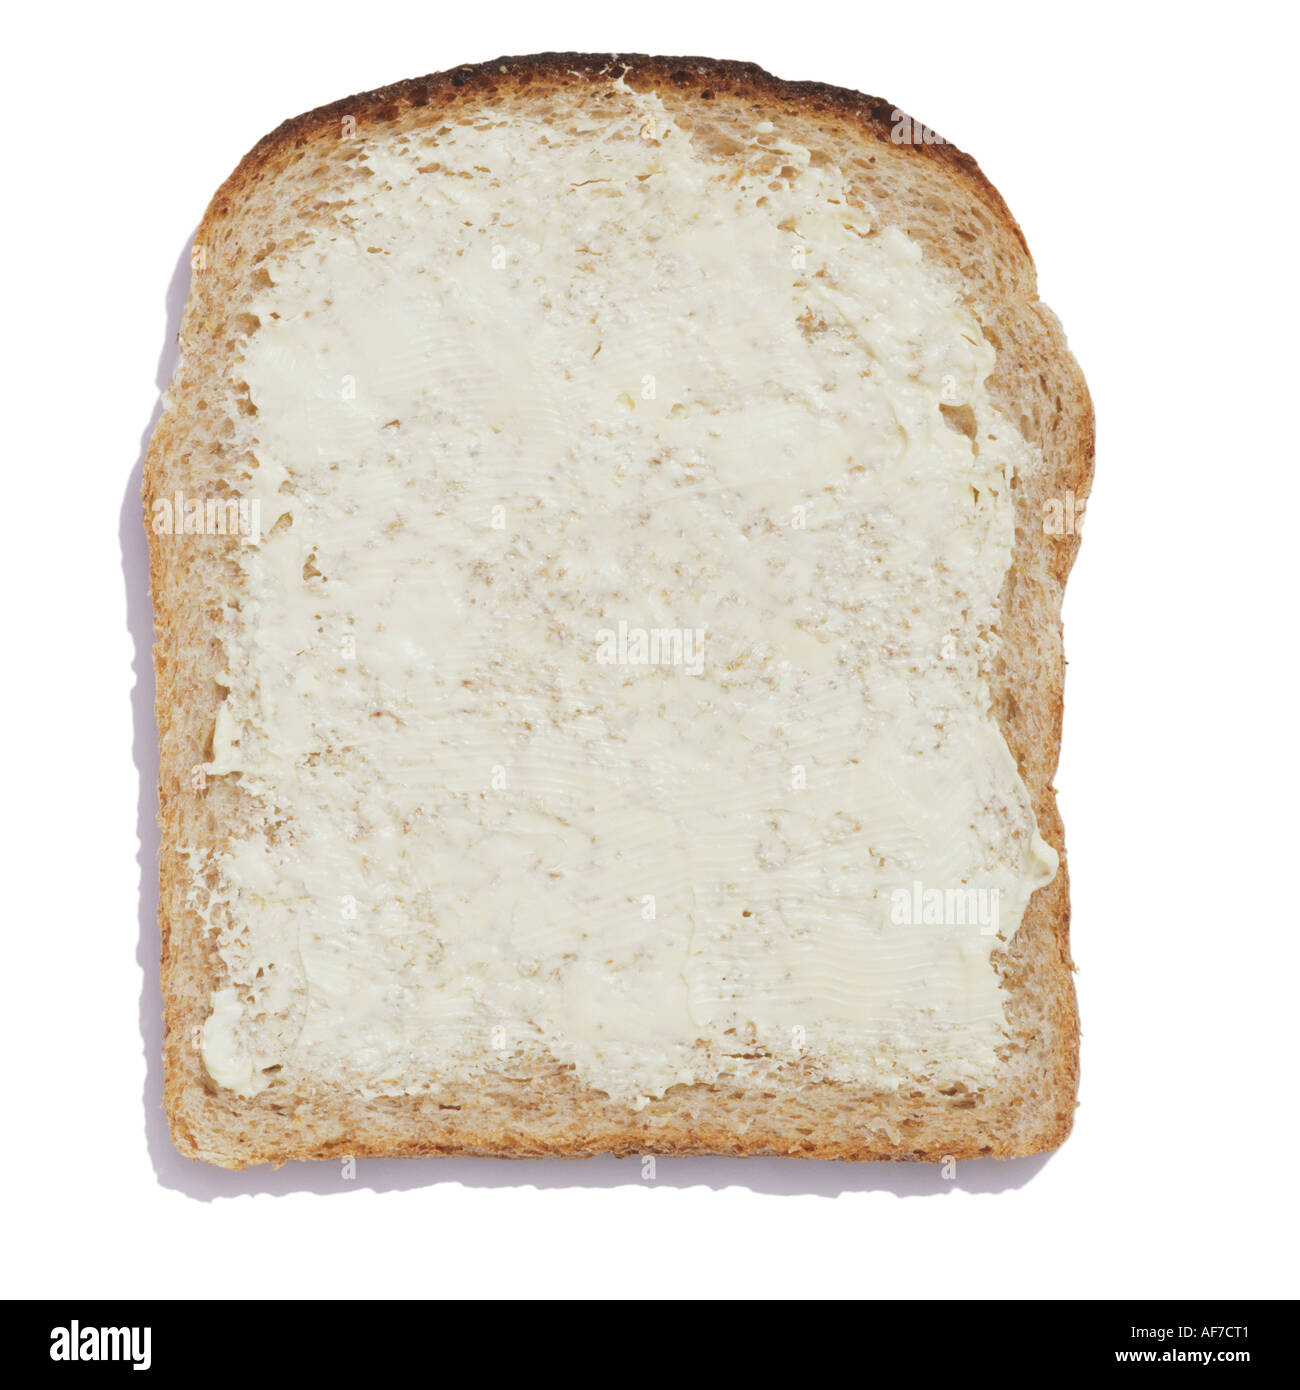 A buttered slice of wholemeal bread Stock Photo